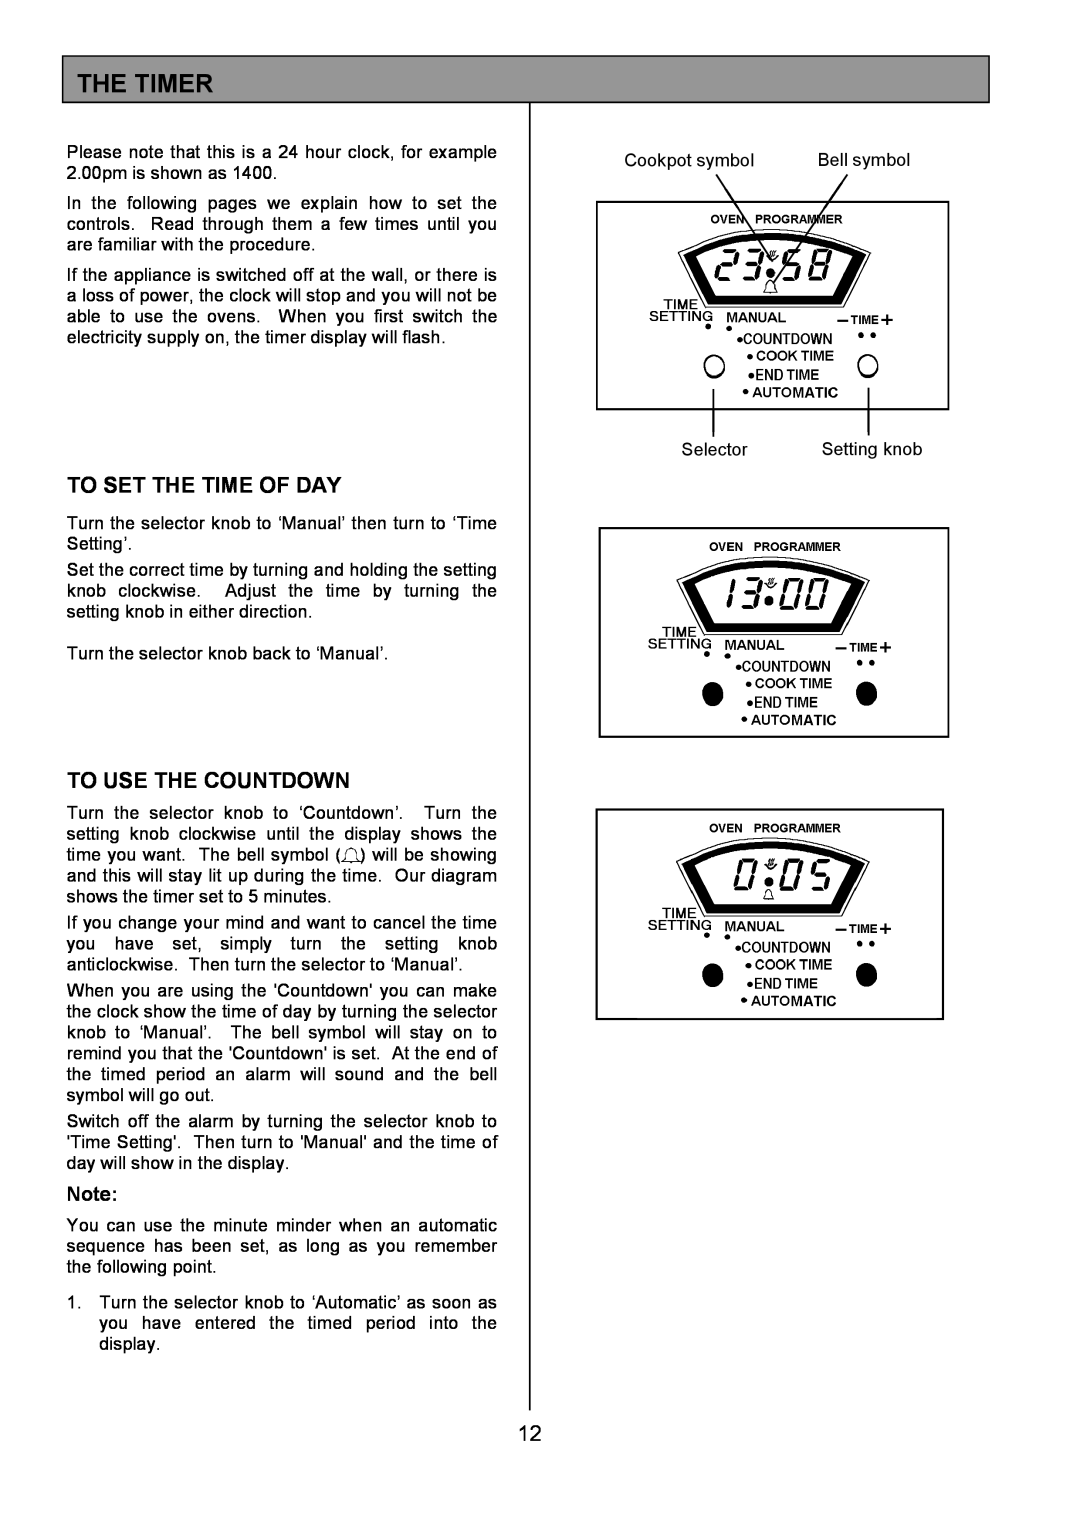 Tricity Bendix SIE533 installation instructions The Timer, To Set The Time Of Day, To Use The Countdown 